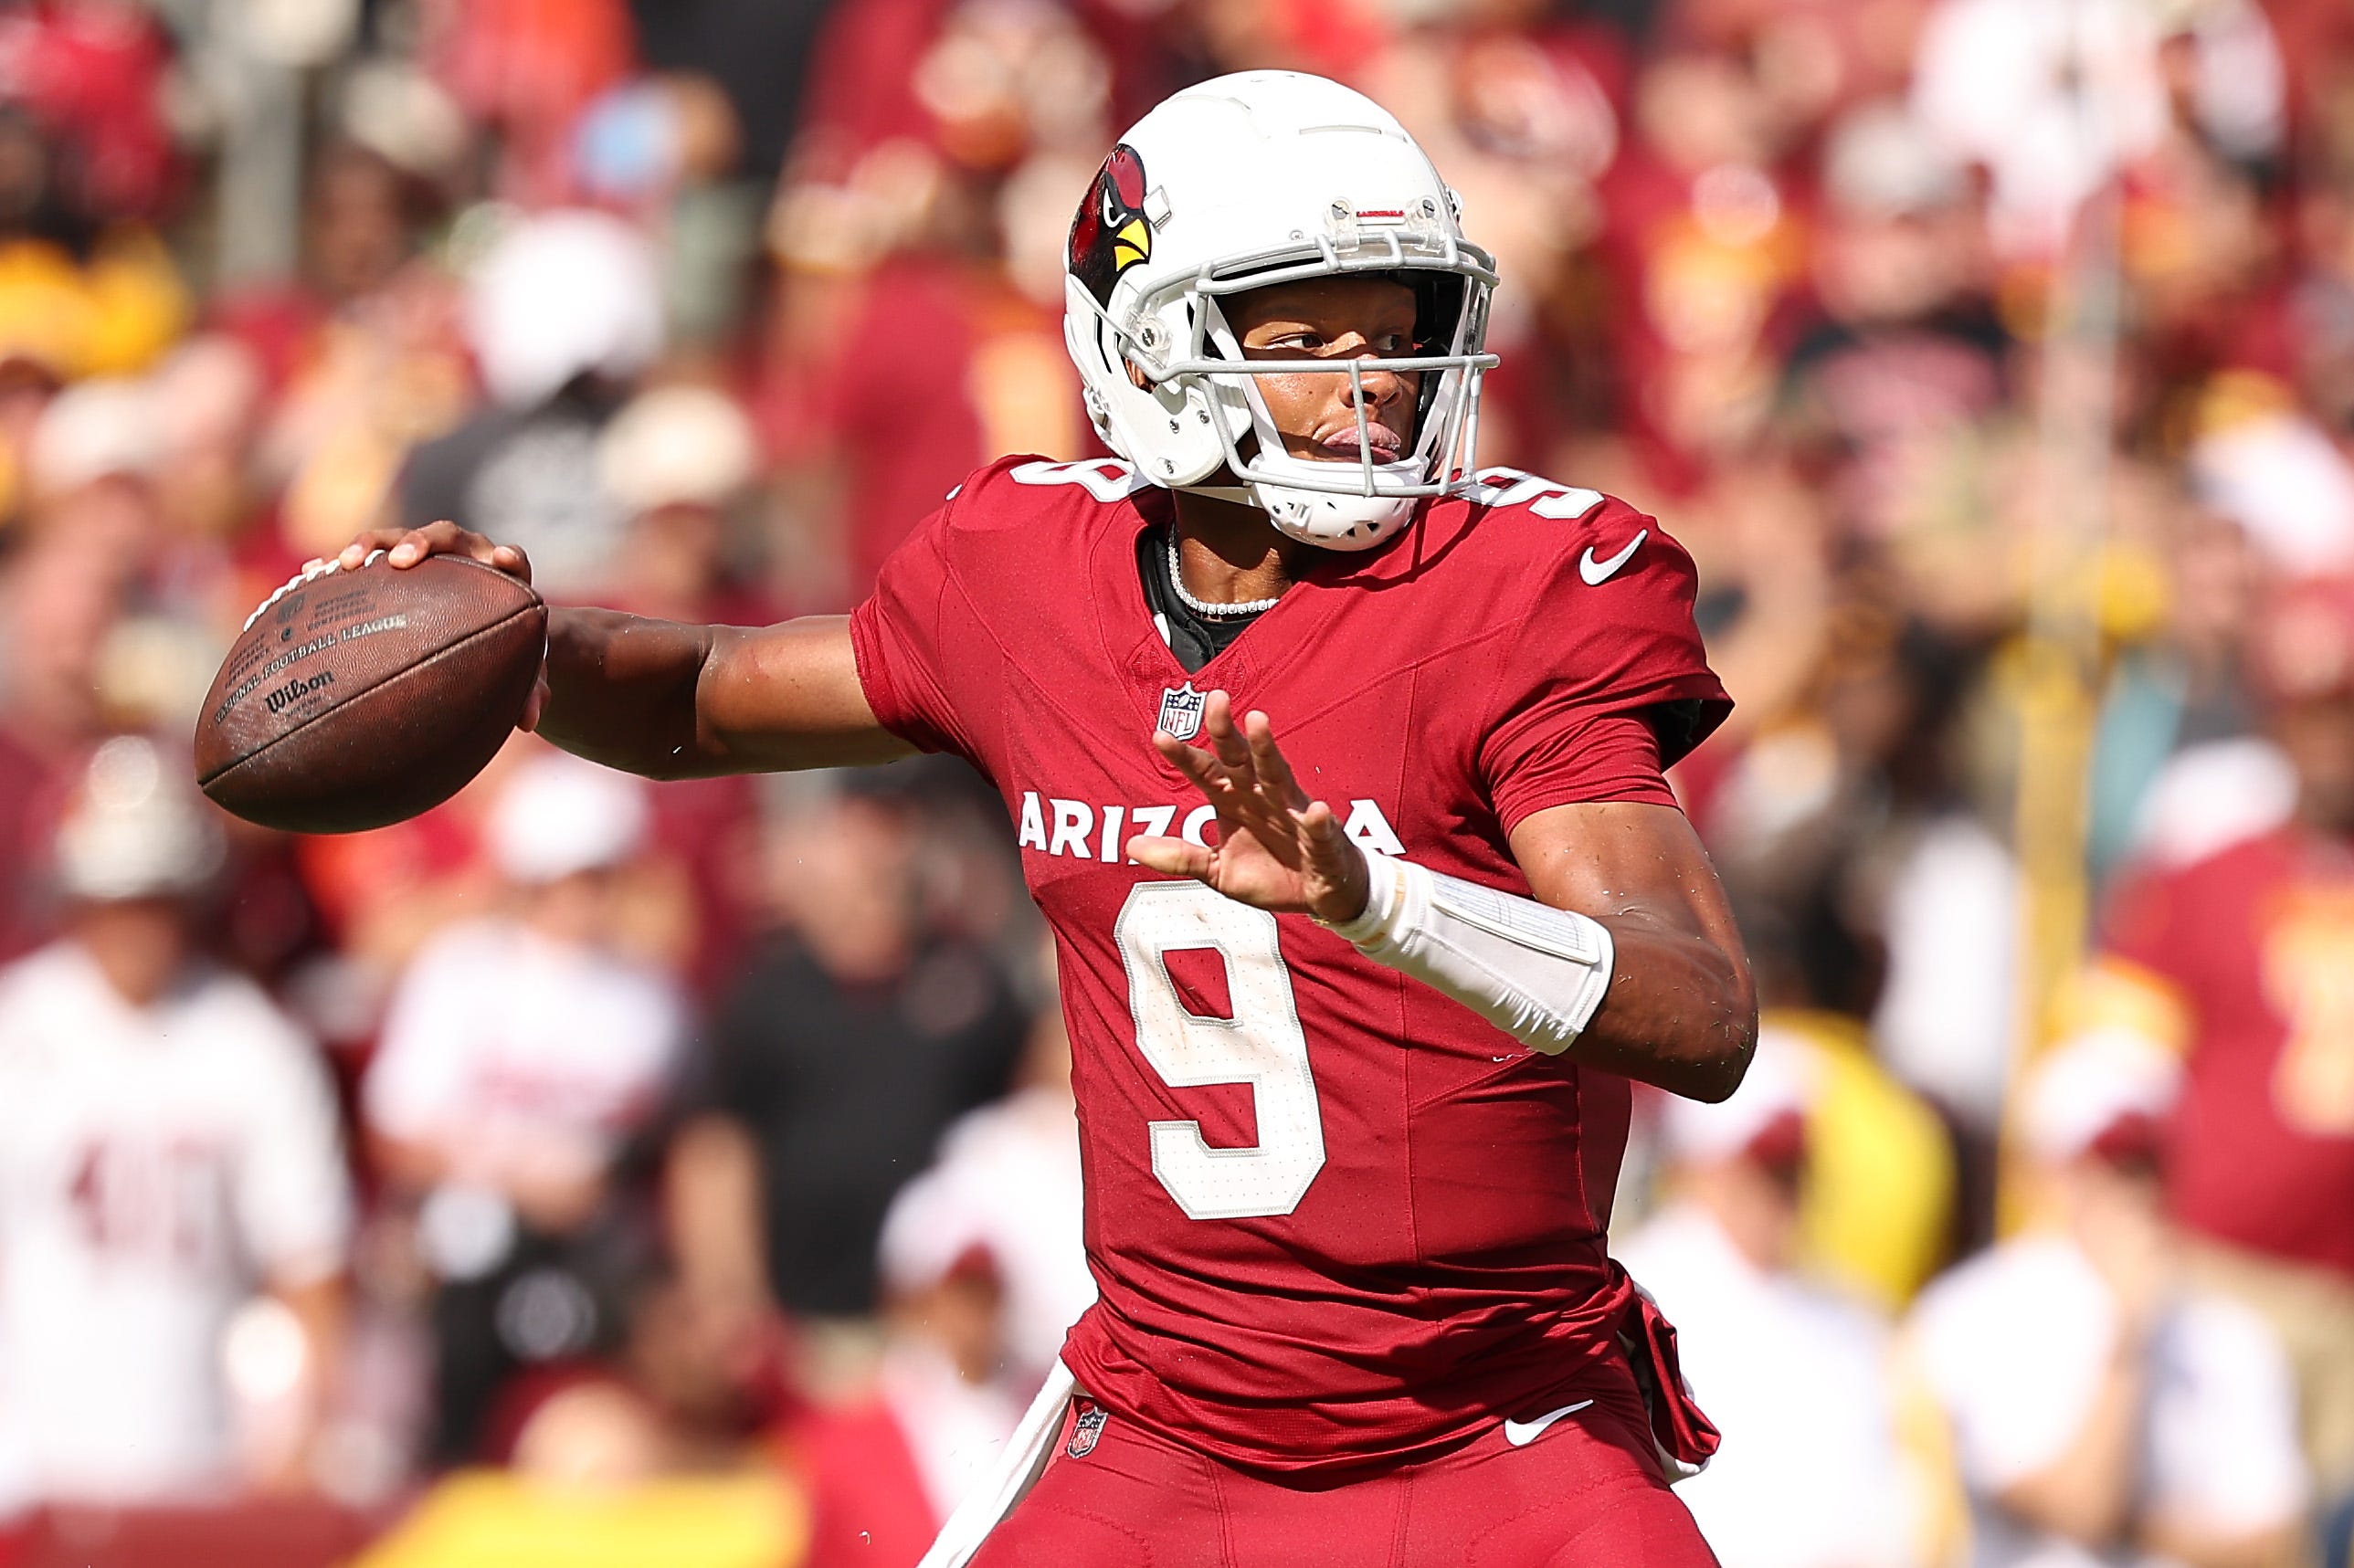 Former Tennessee quarterback Josh Dobbs can't buy his own jersey at Cardinals team store